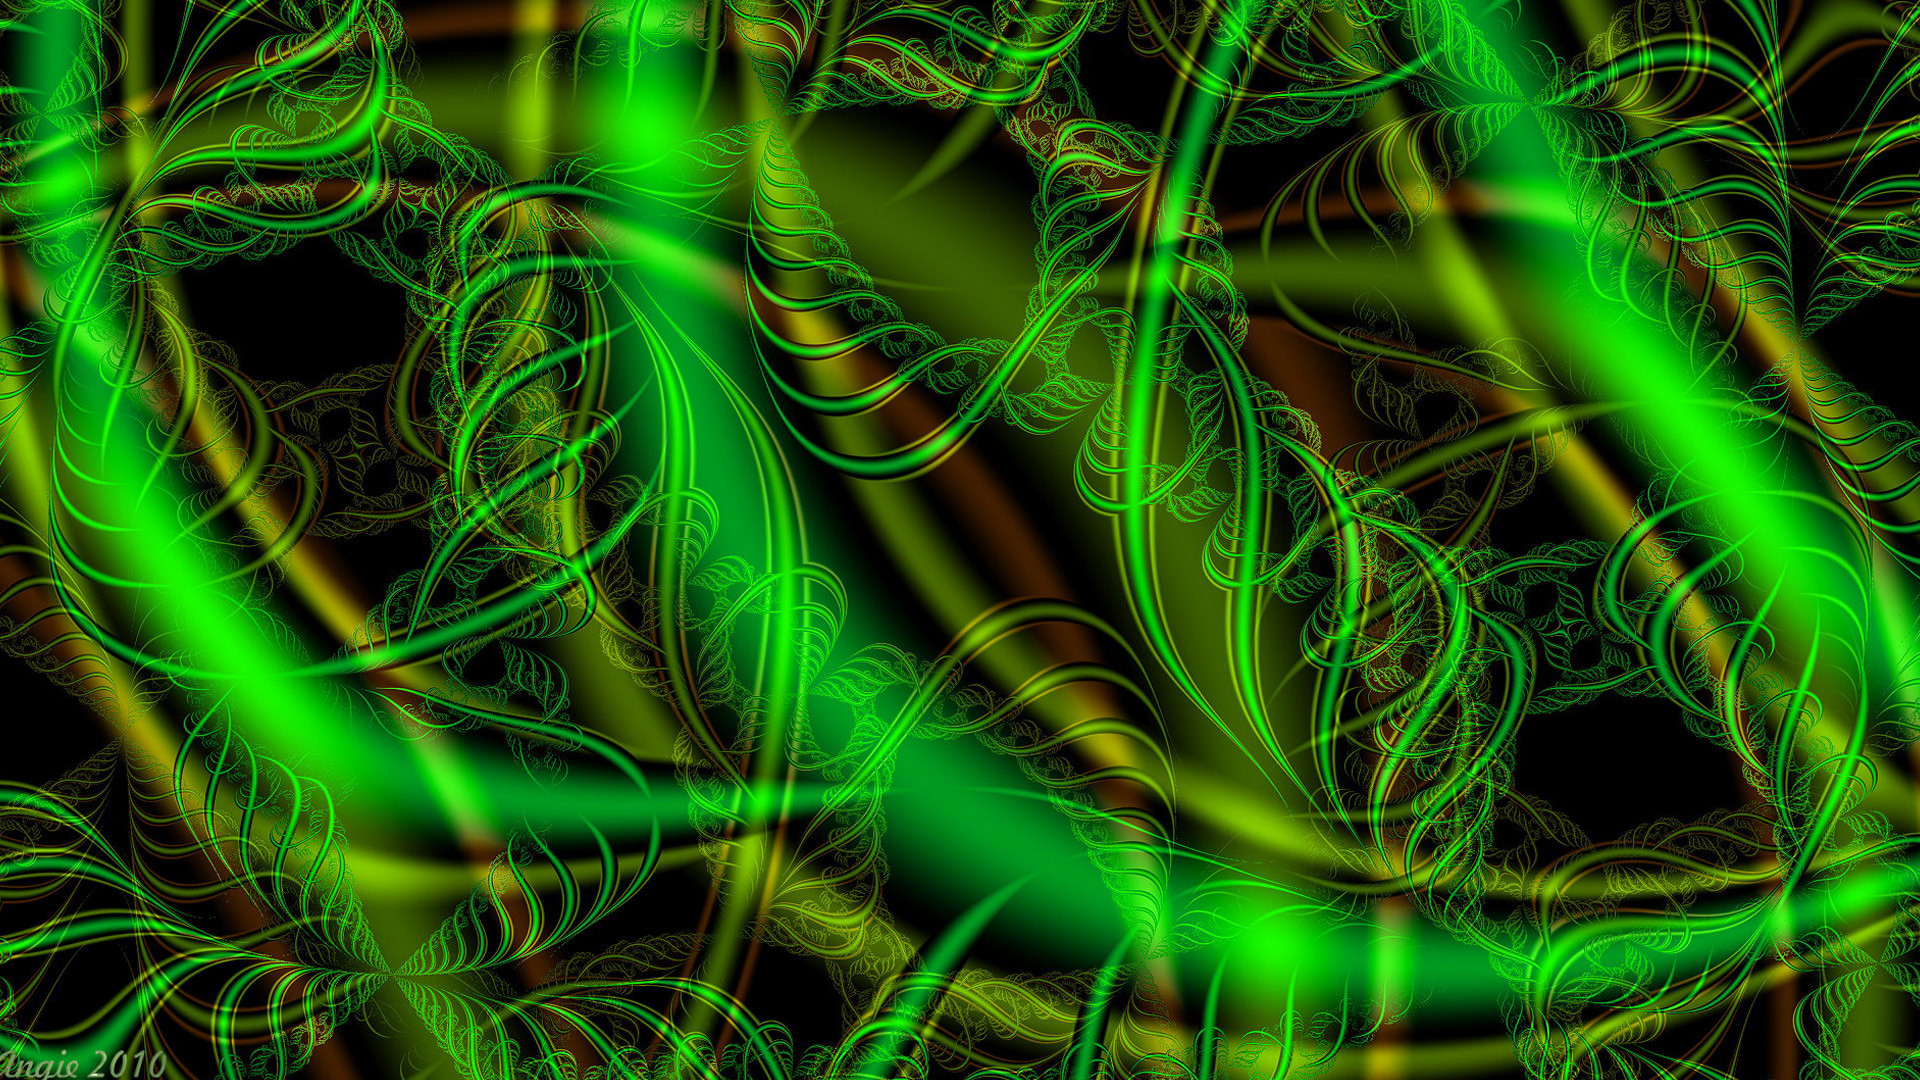 1920x1080 Download Free Green Neon Image.